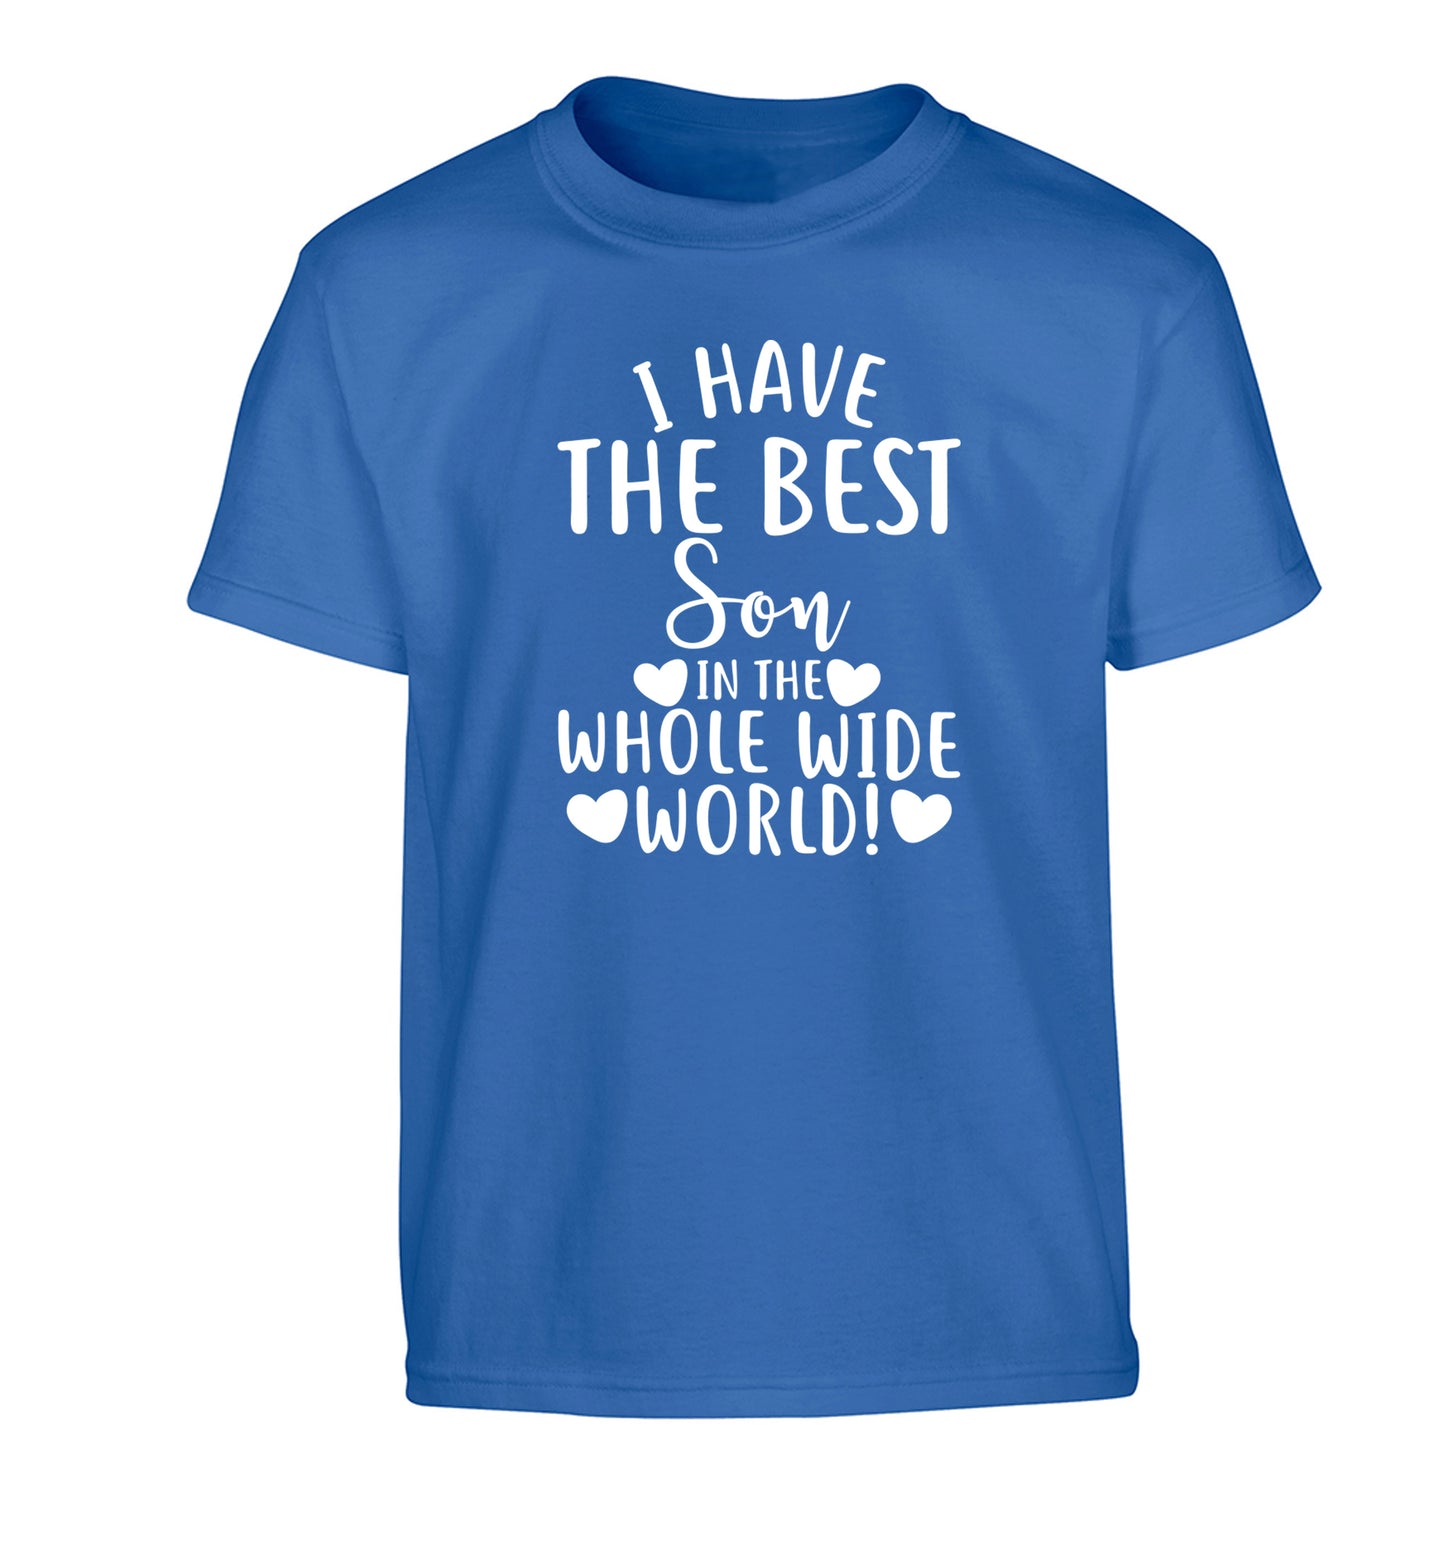 I have the best son in the whole wide world! Children's blue Tshirt 12-13 Years